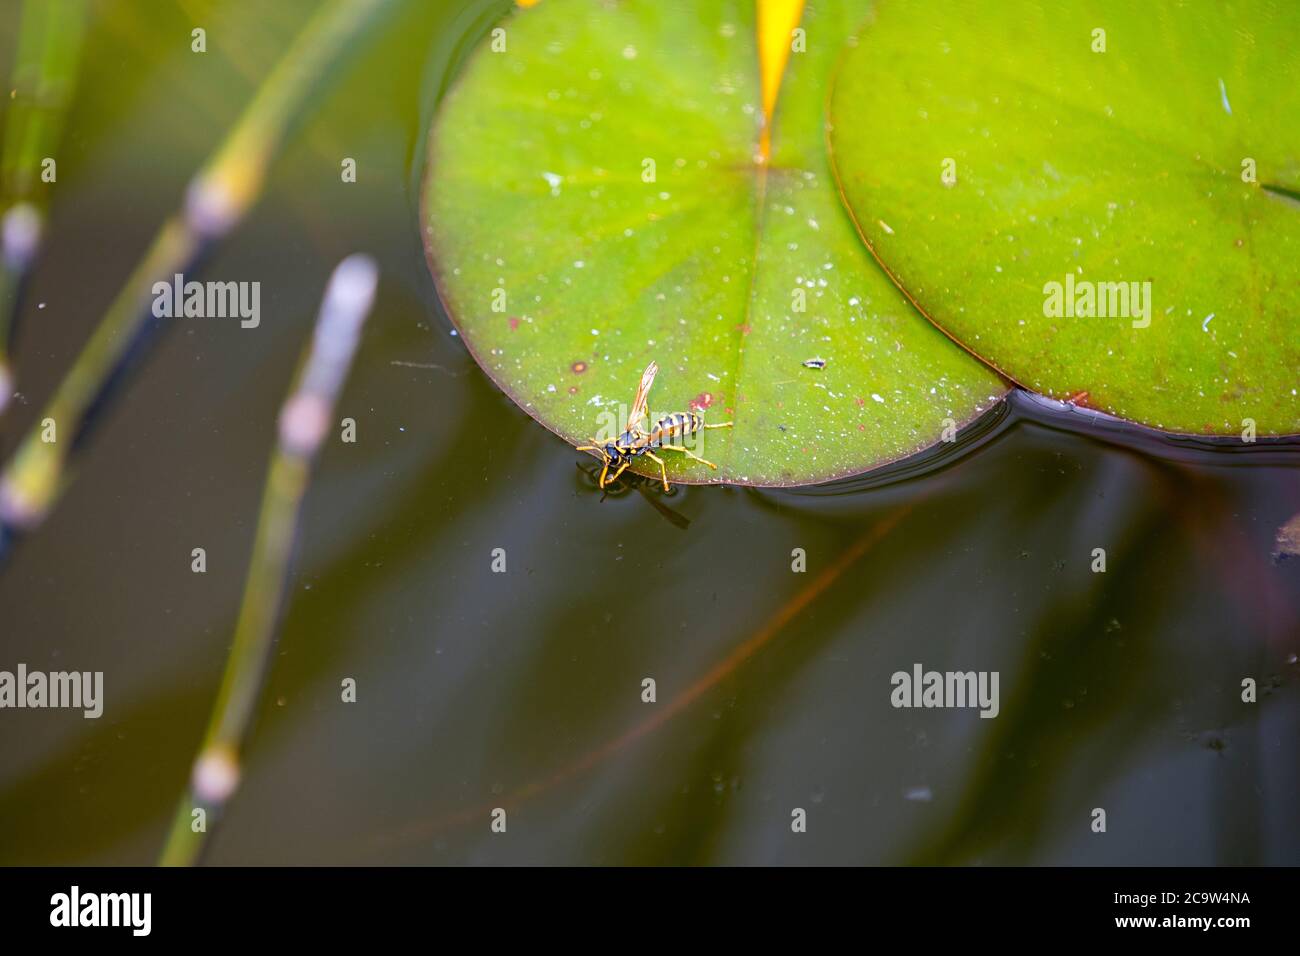 Wasp drinking on a lily pad by the water Stock Photo